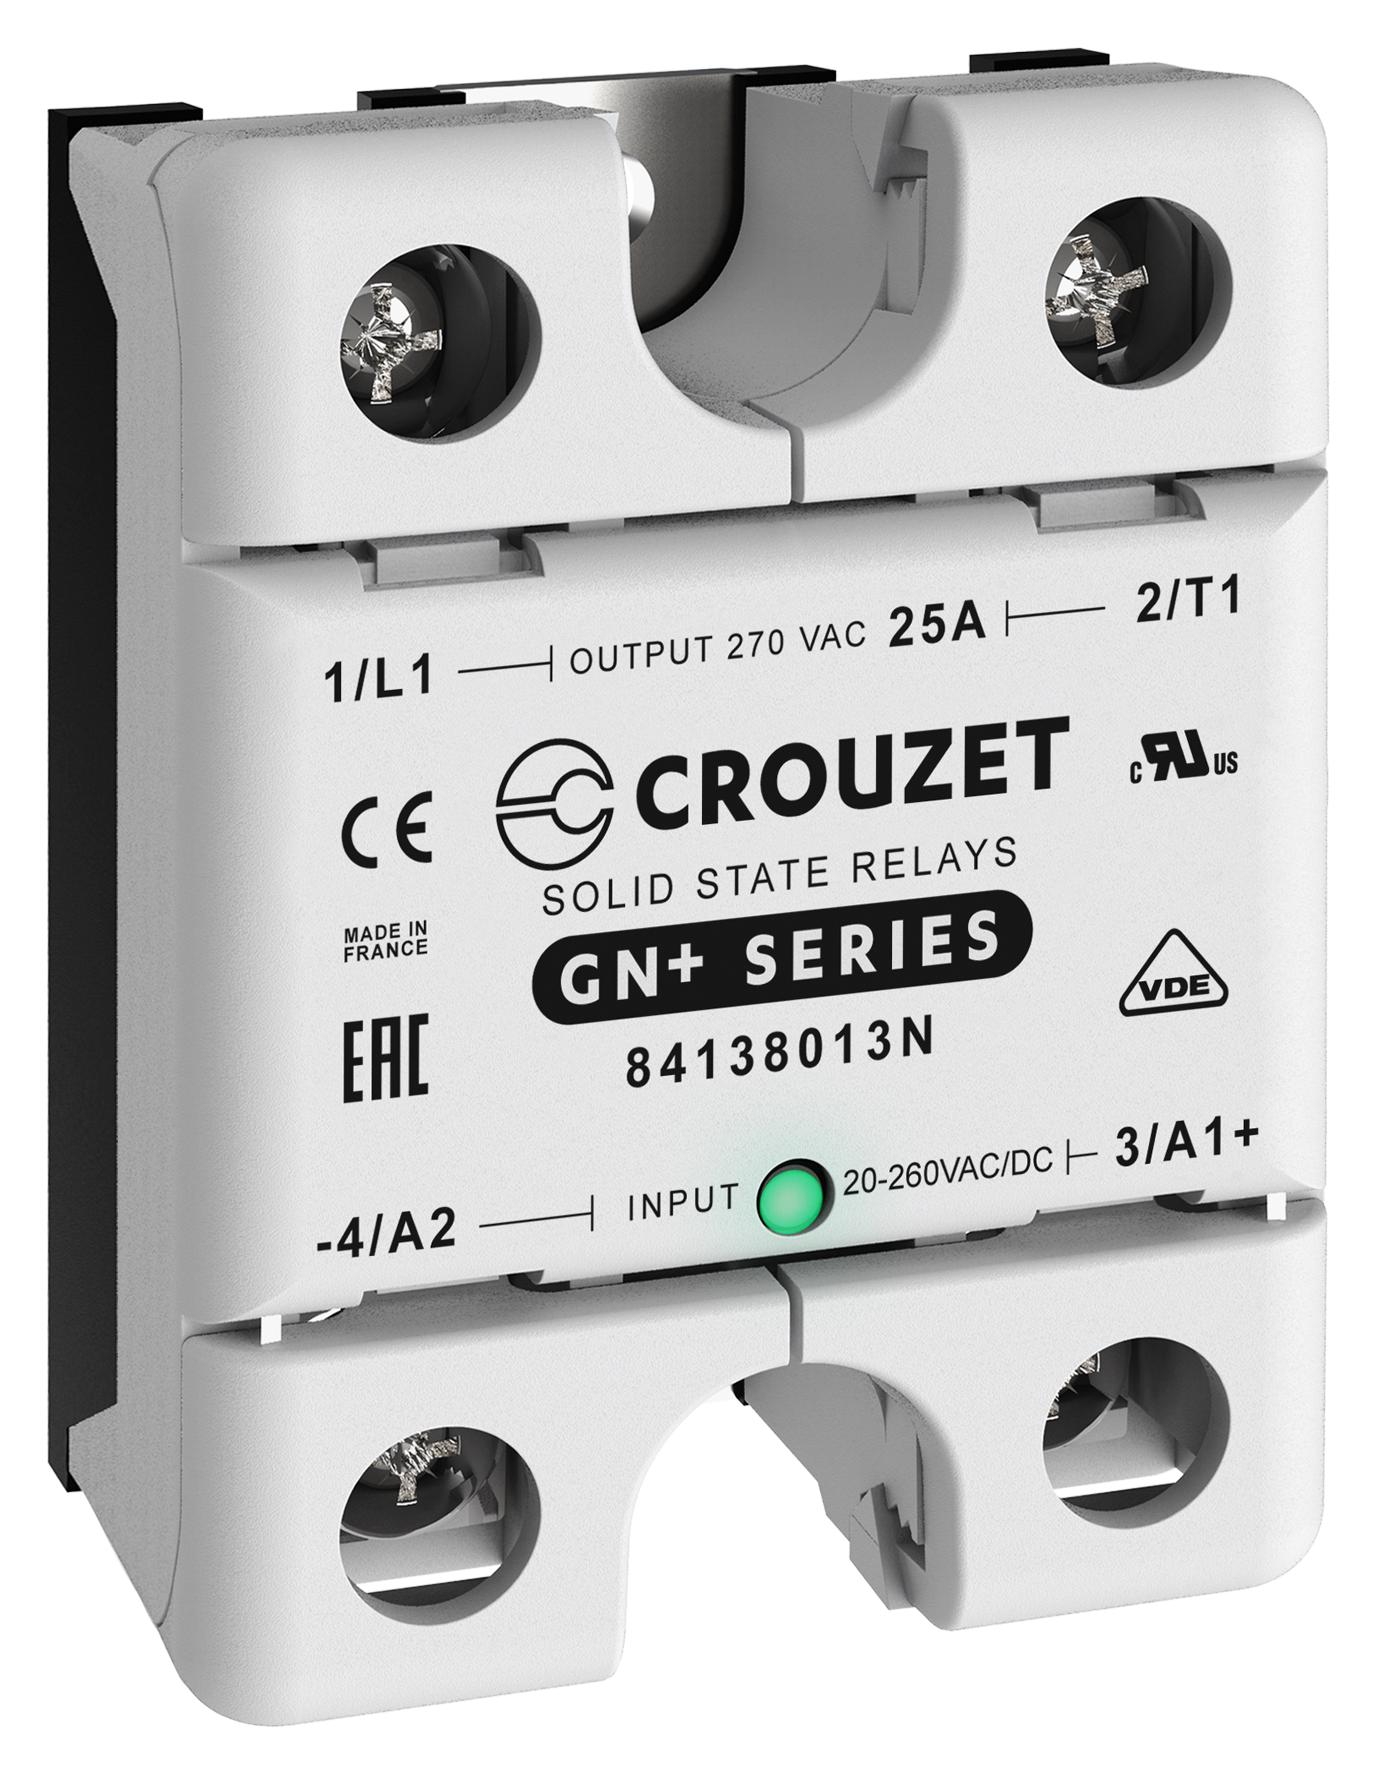 84138013N SOLID STATE RELAY, 25A, 12-270VAC, PANEL CROUZET